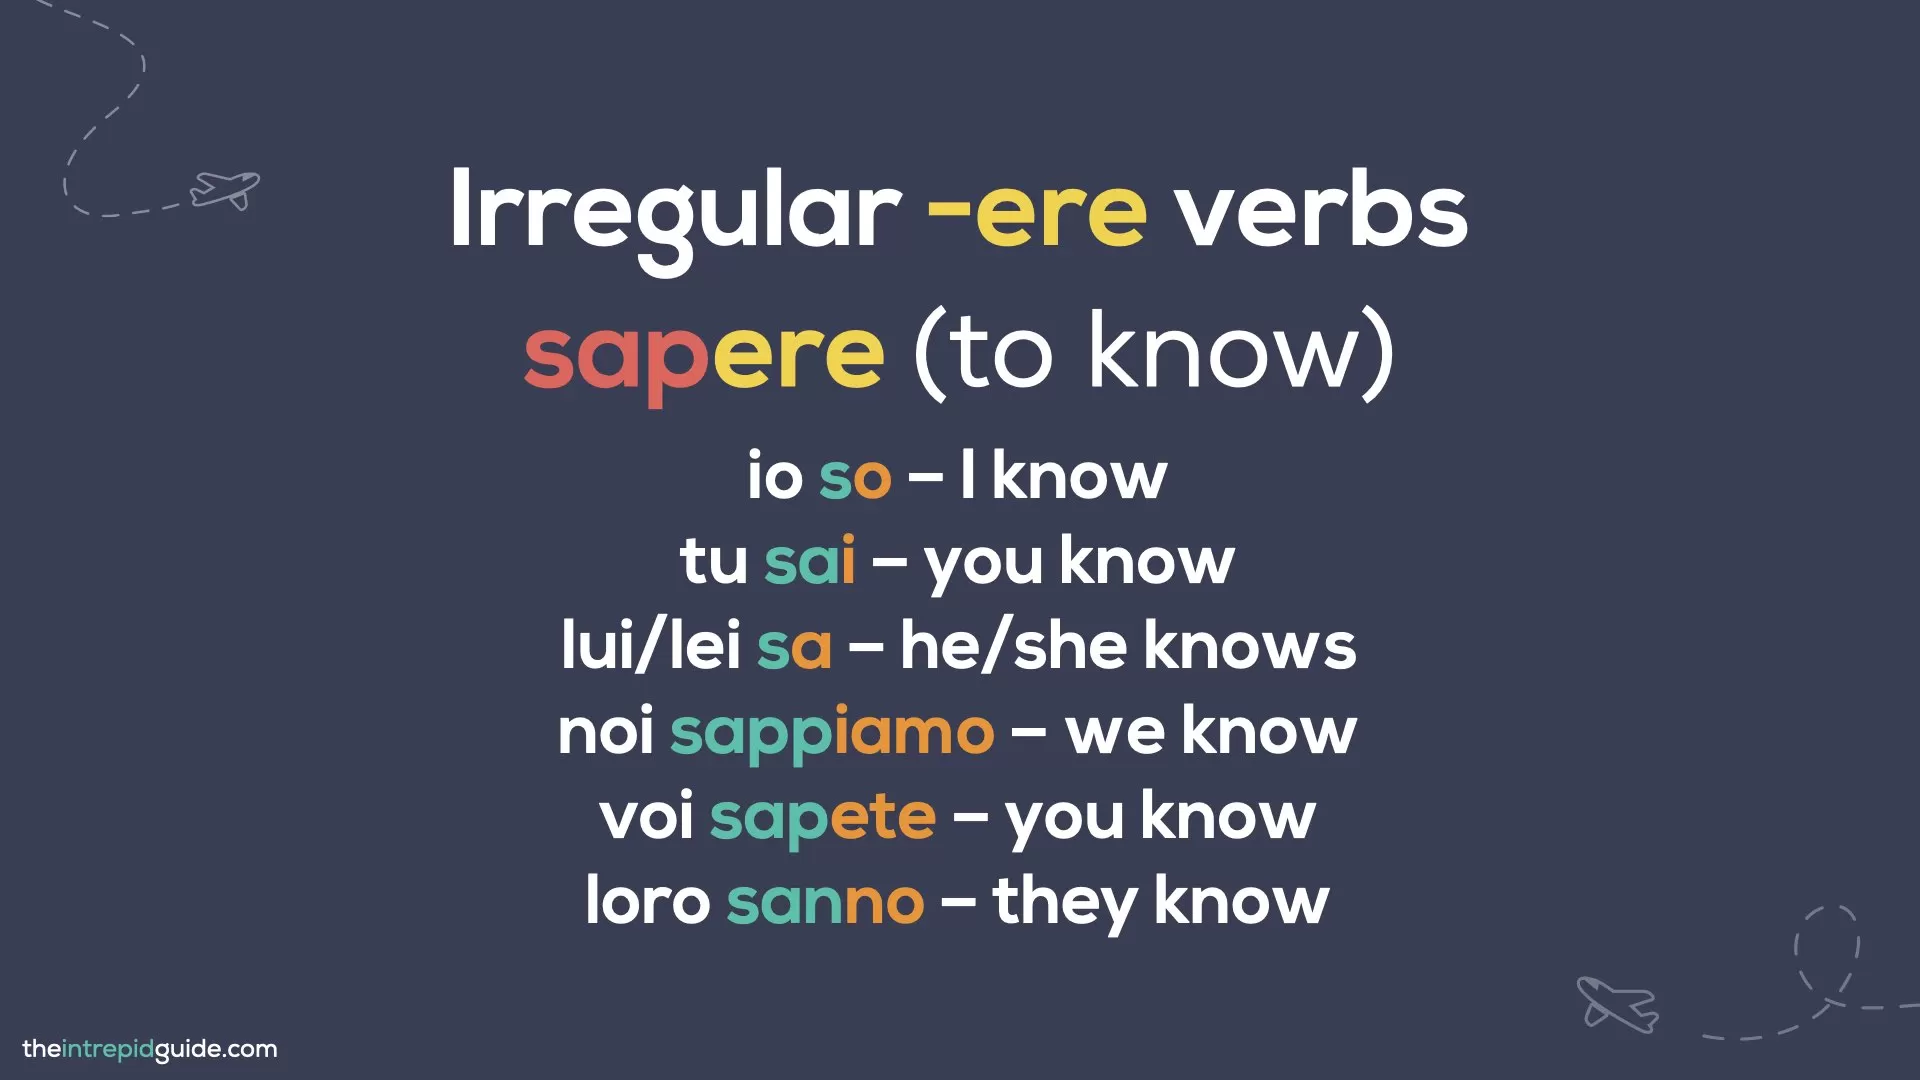 How to Conjugate Italian Verbs - Conjugating the verb sapere - to know